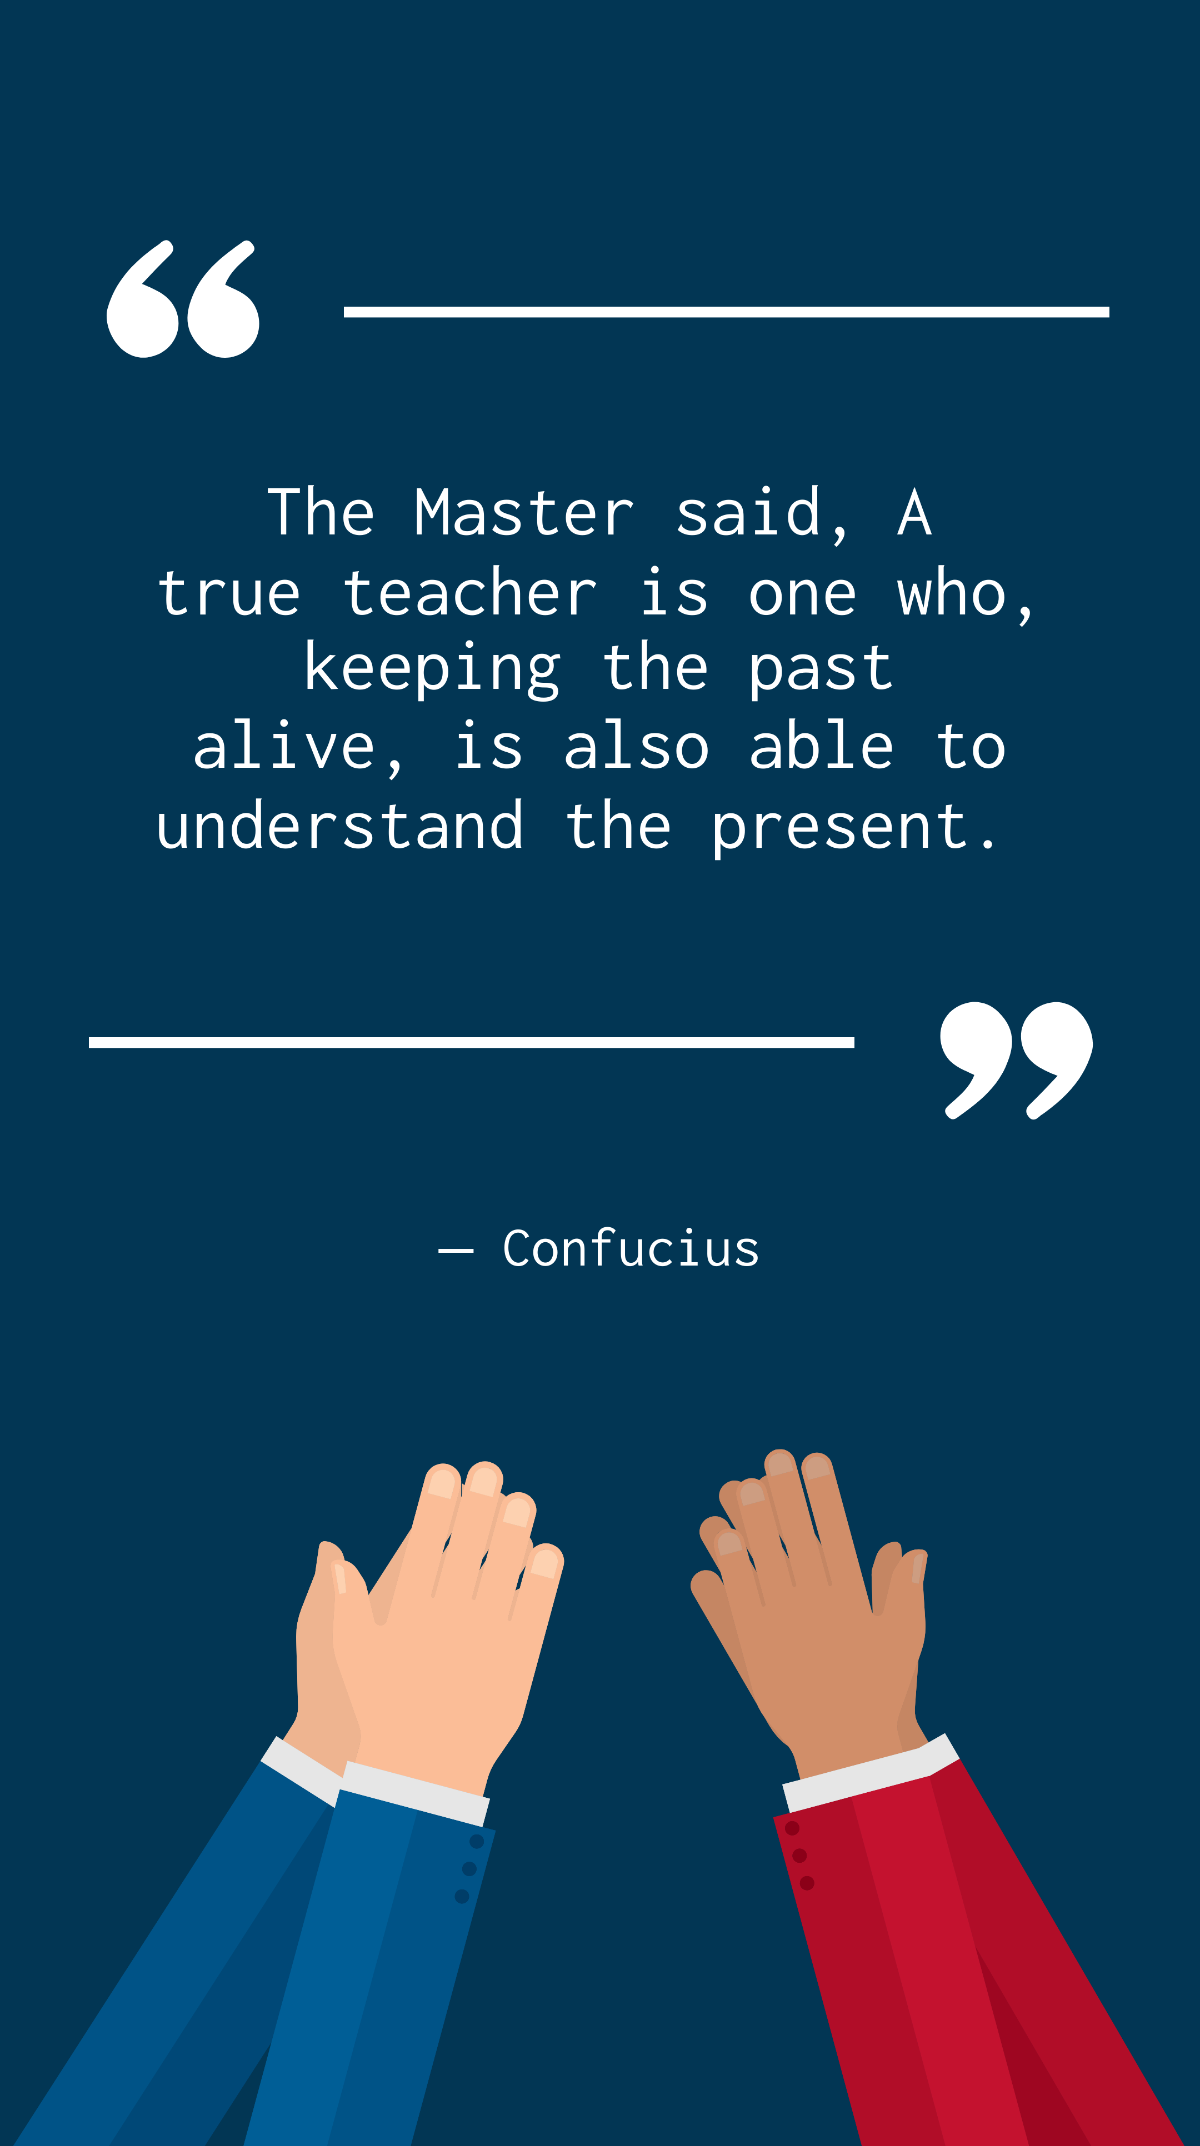 Free Confucius - The Master said, A true teacher is one who, keeping the past alive, is also able to understand the present. Template